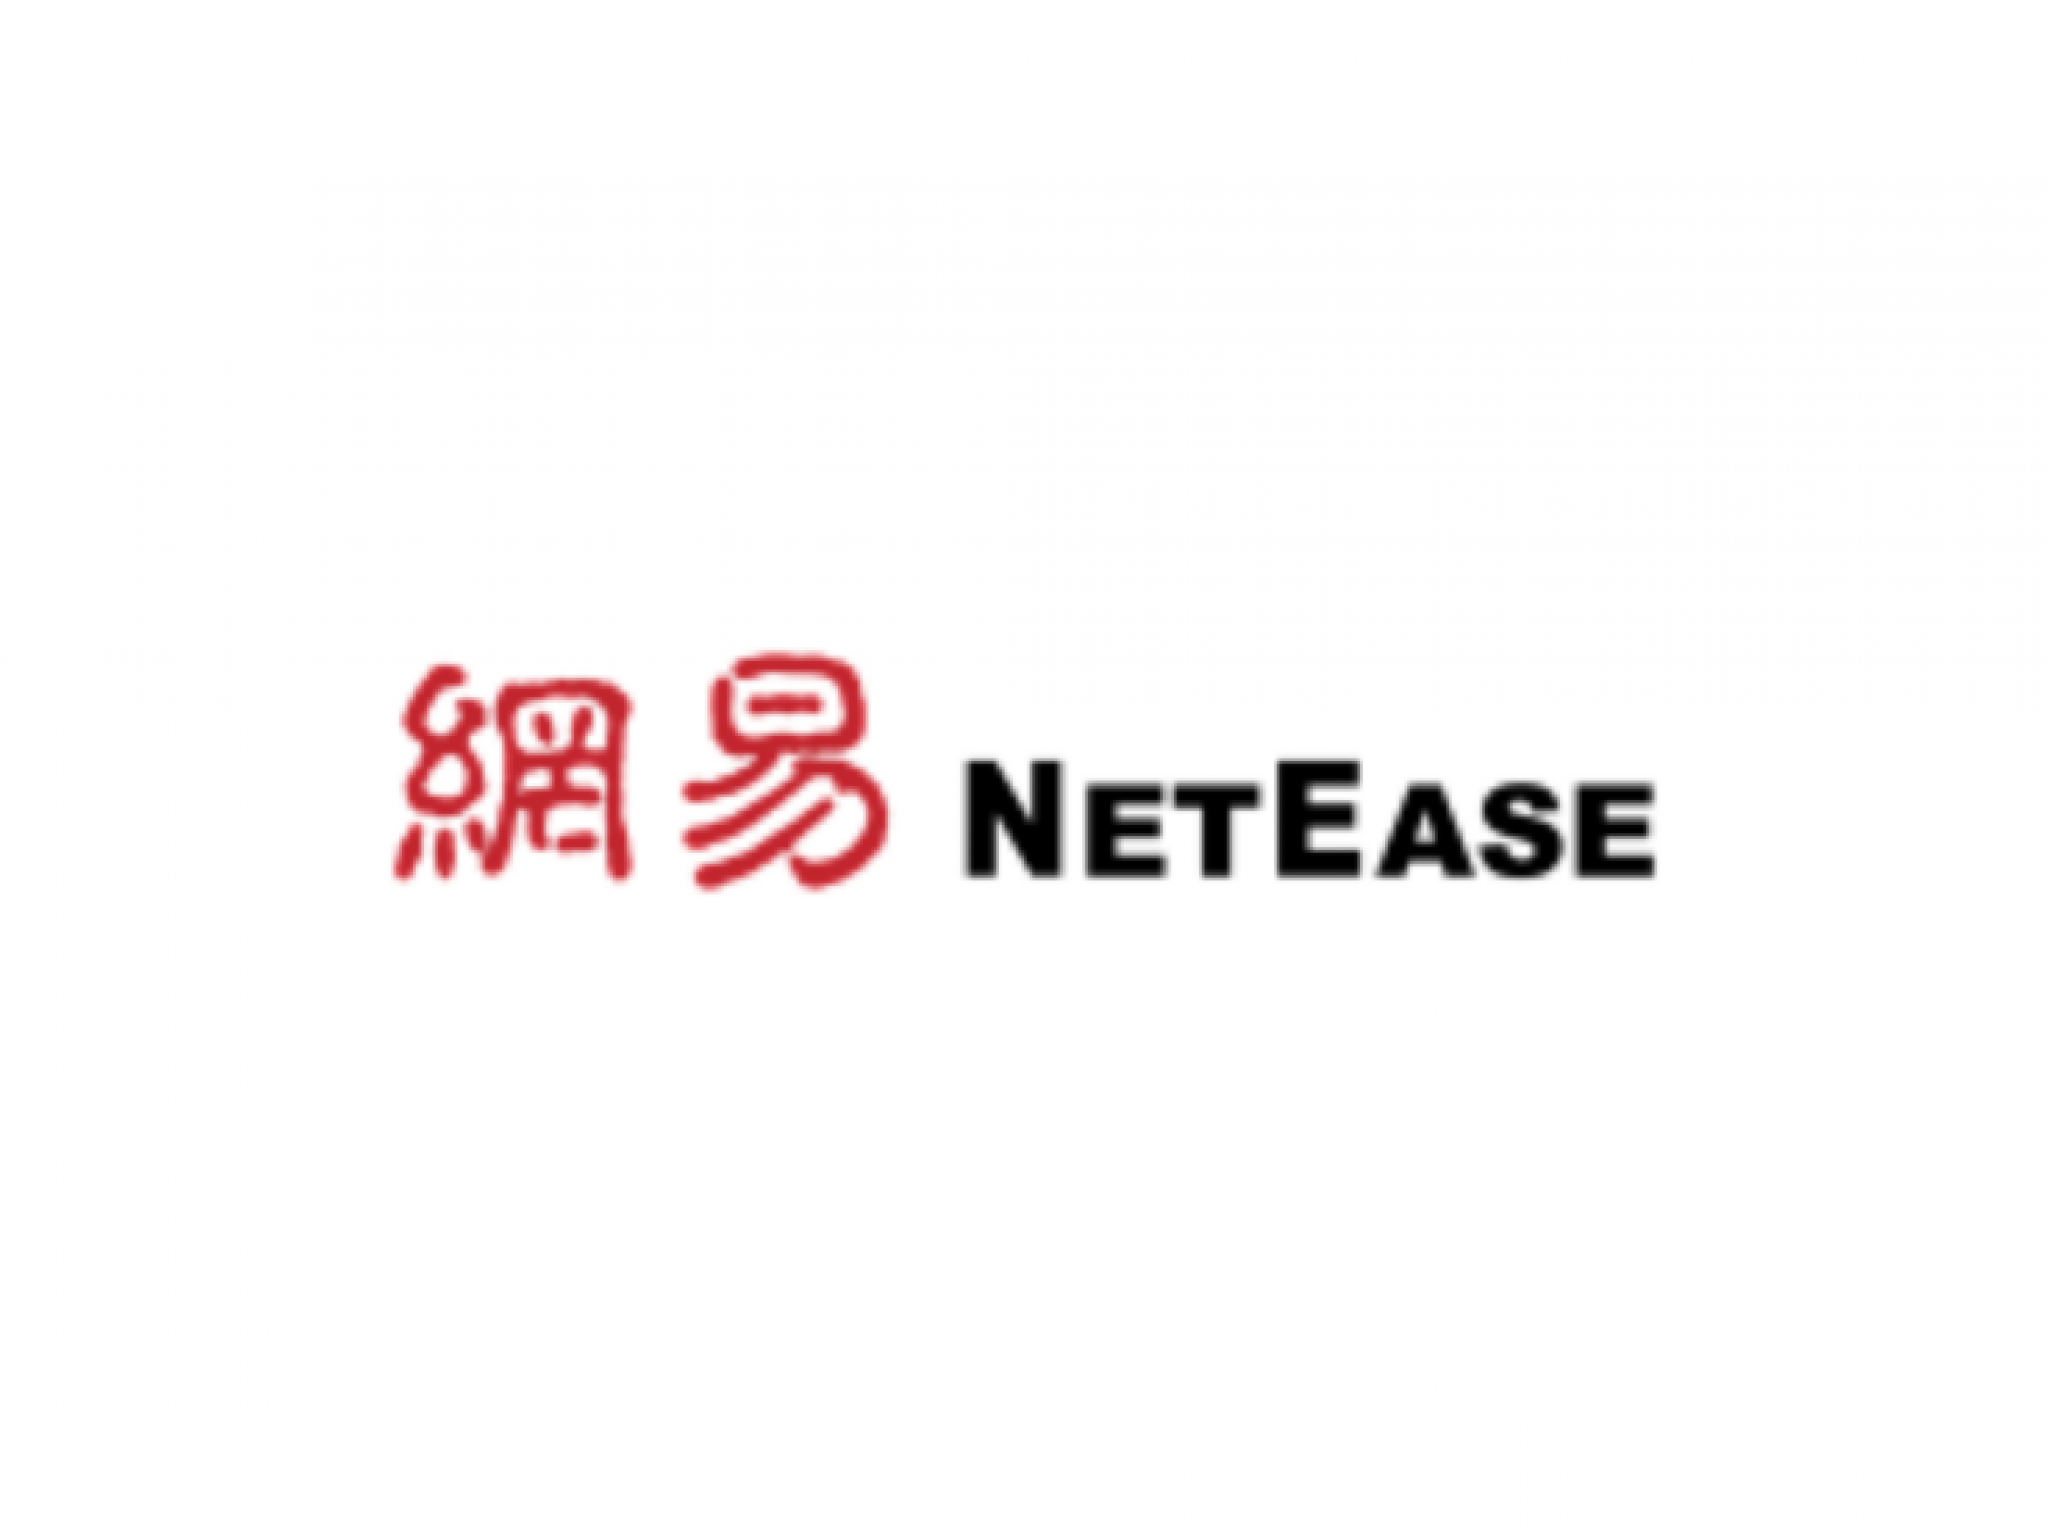  netease-stock-dips-after-q4-print-whats-going-on 